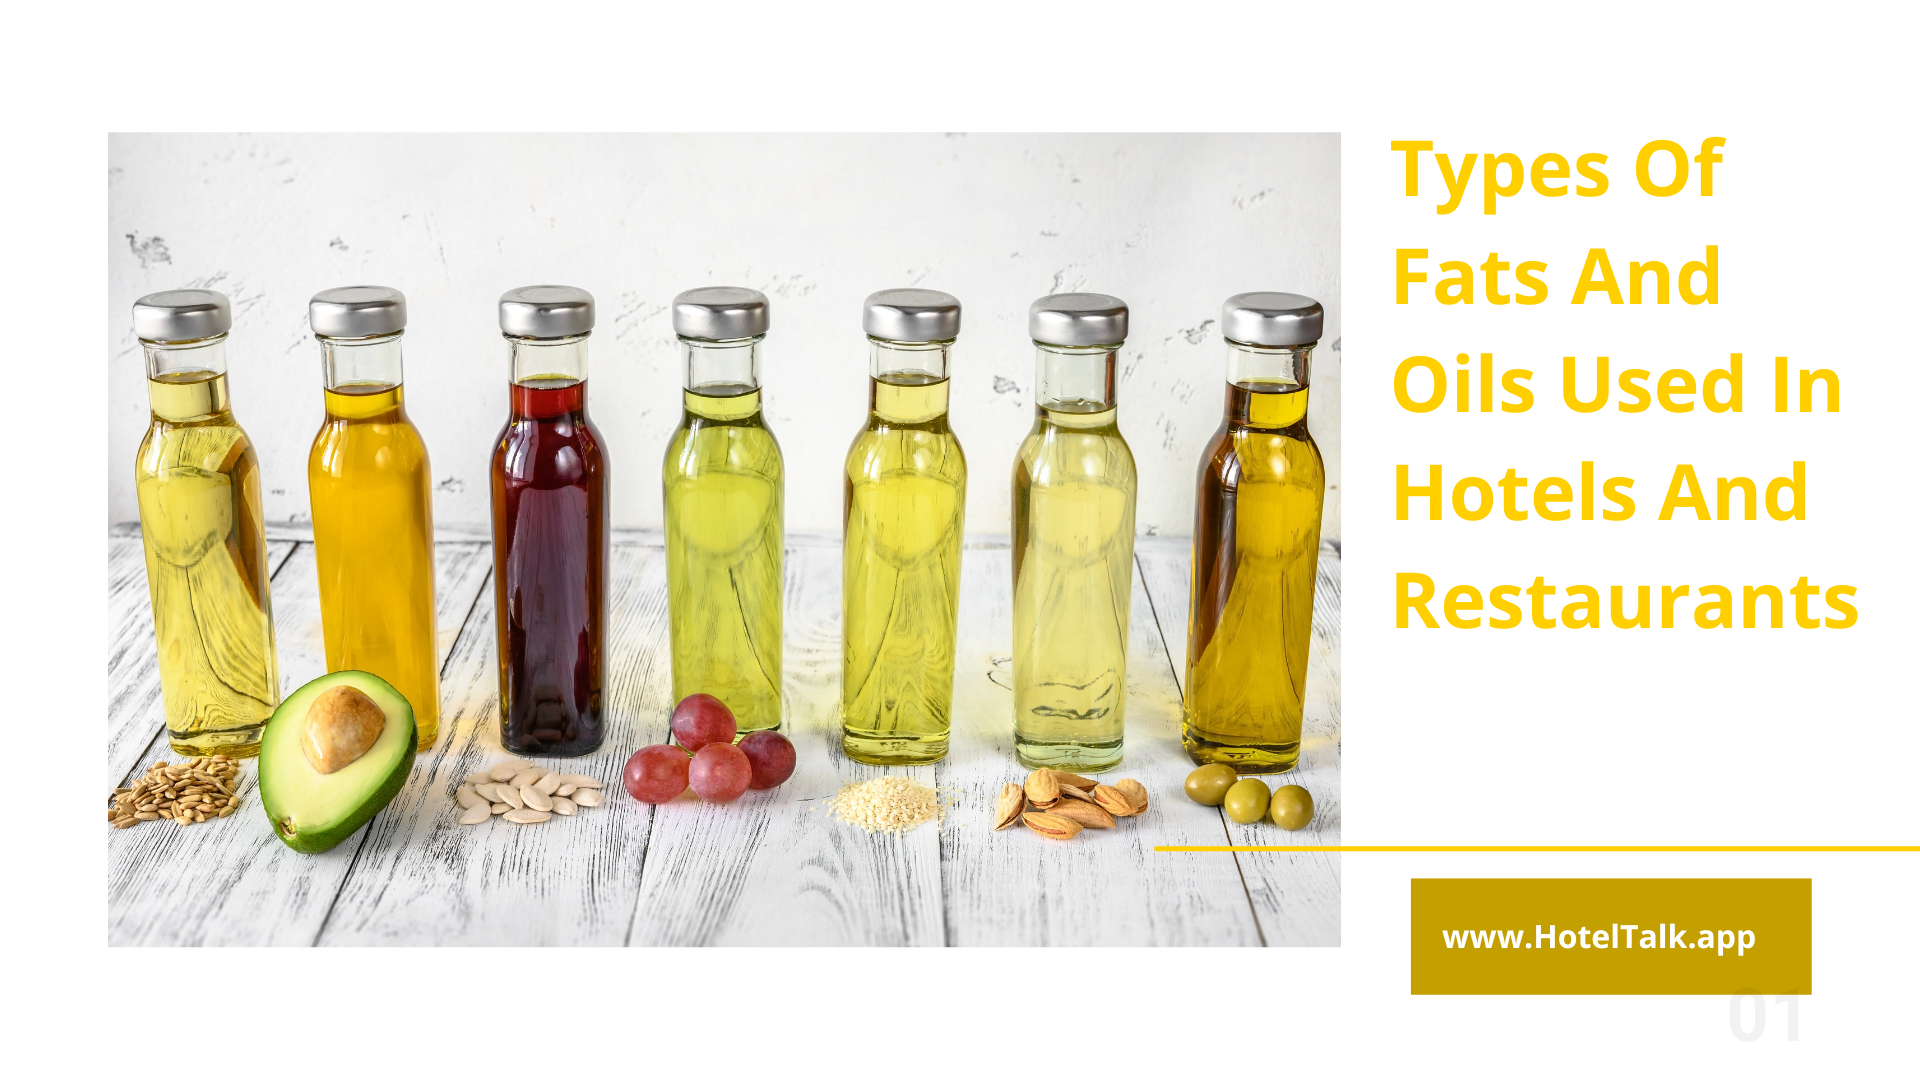 Types Of Fats And Oils Used In Hotels And Restaurants